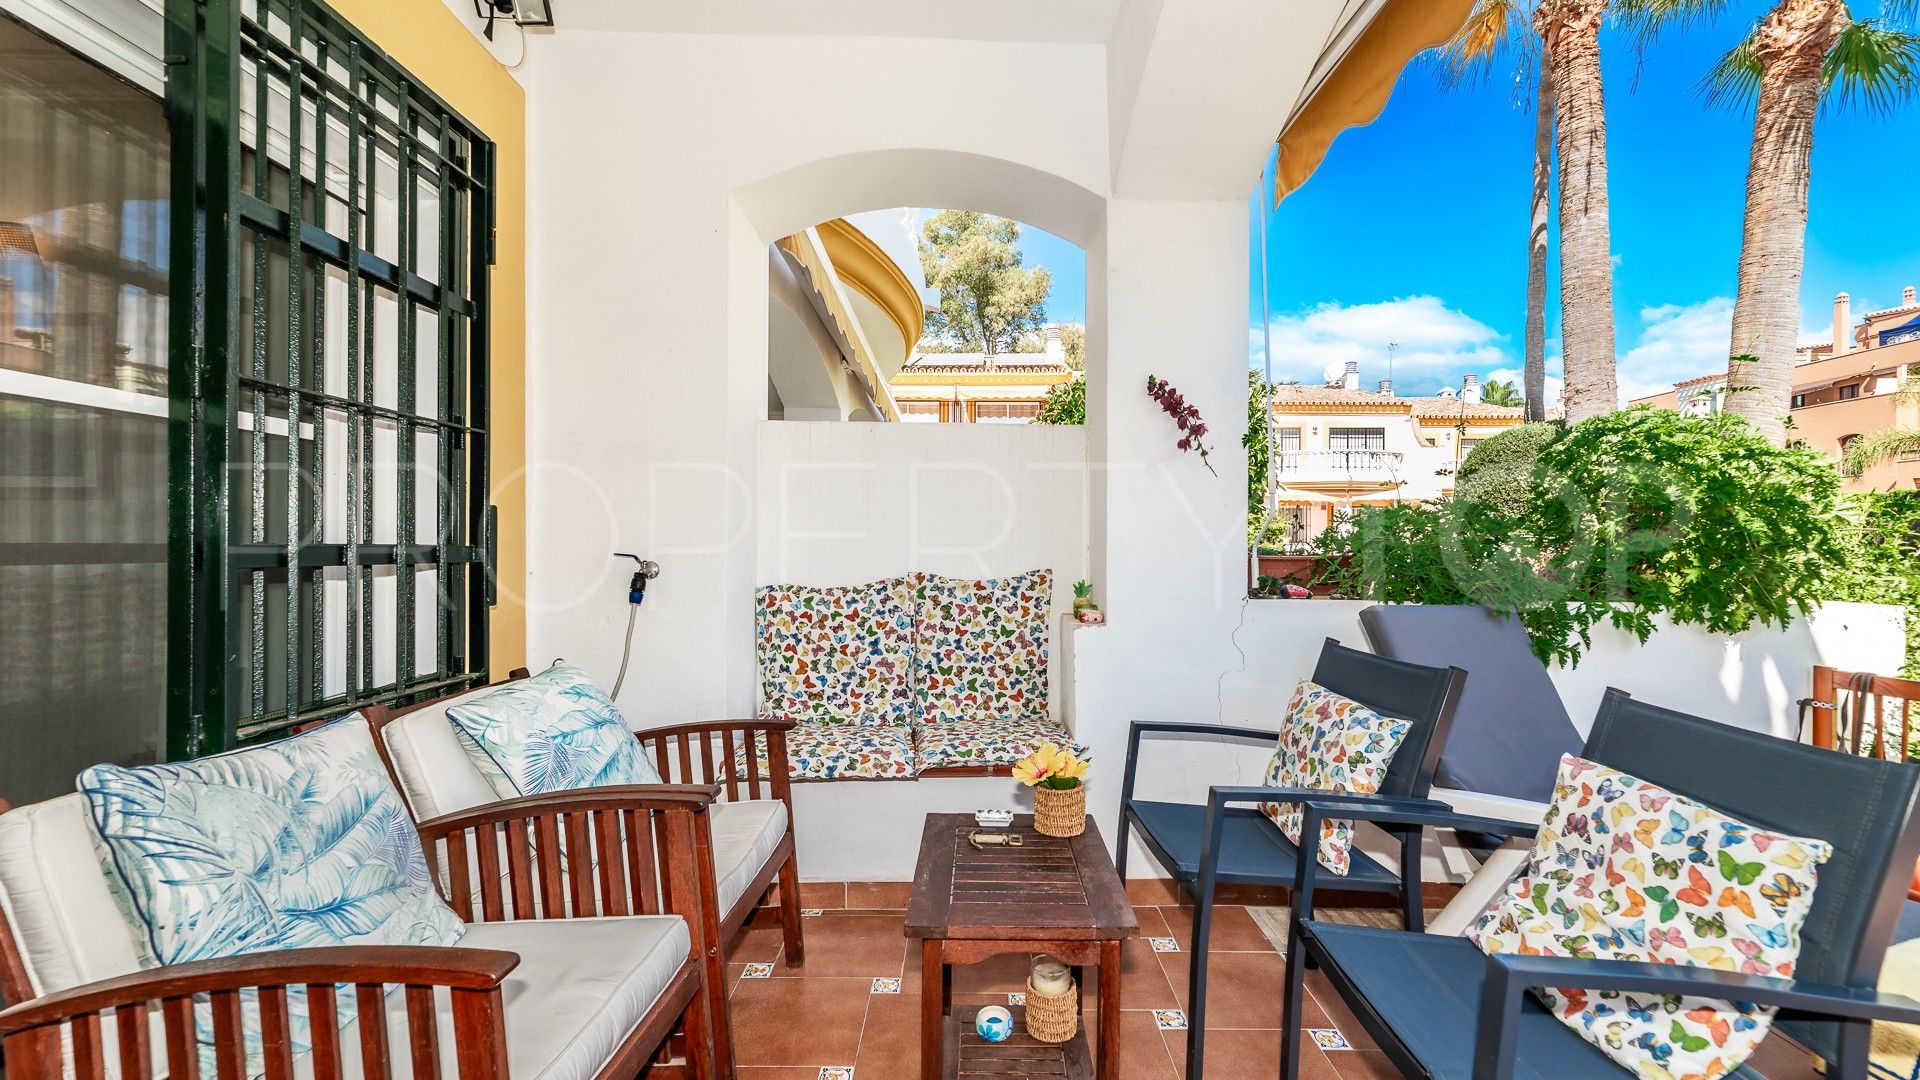 Town house with 5 bedrooms for sale in San Pedro Playa